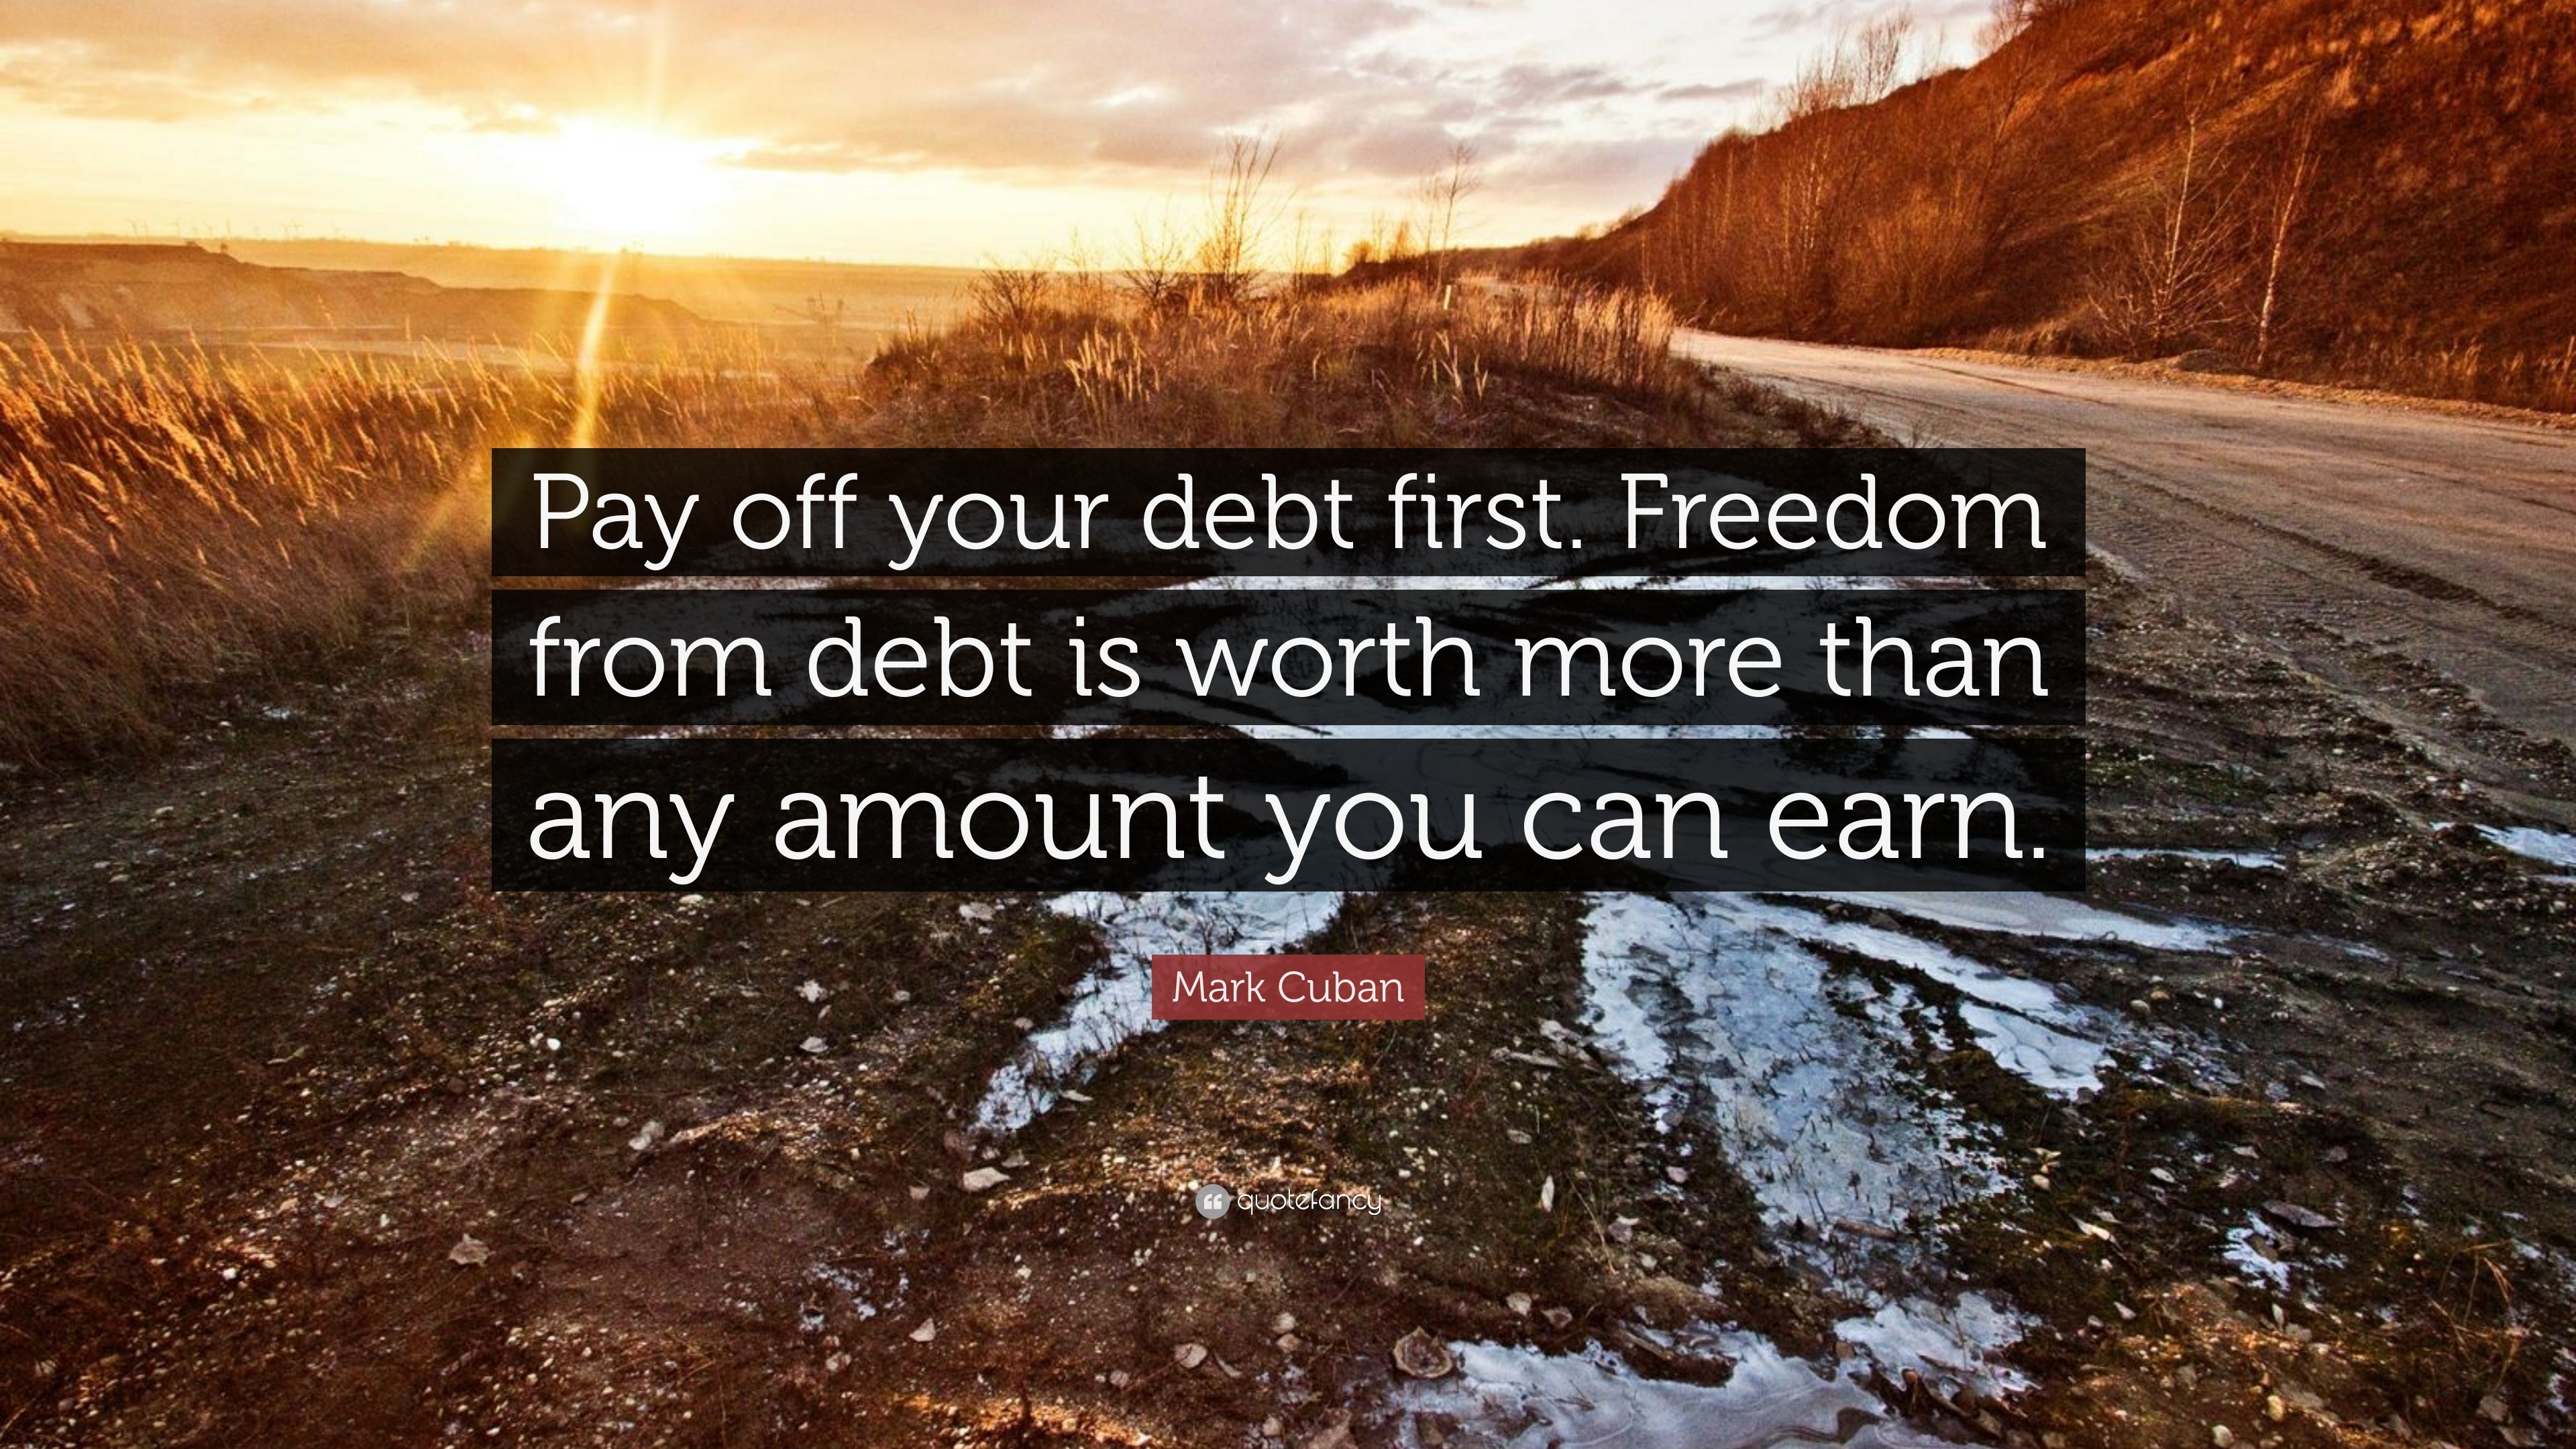 Mark Cuban Quote: “Pay Off Your Debt First. Freedom From Debt Is Worth More Than Any